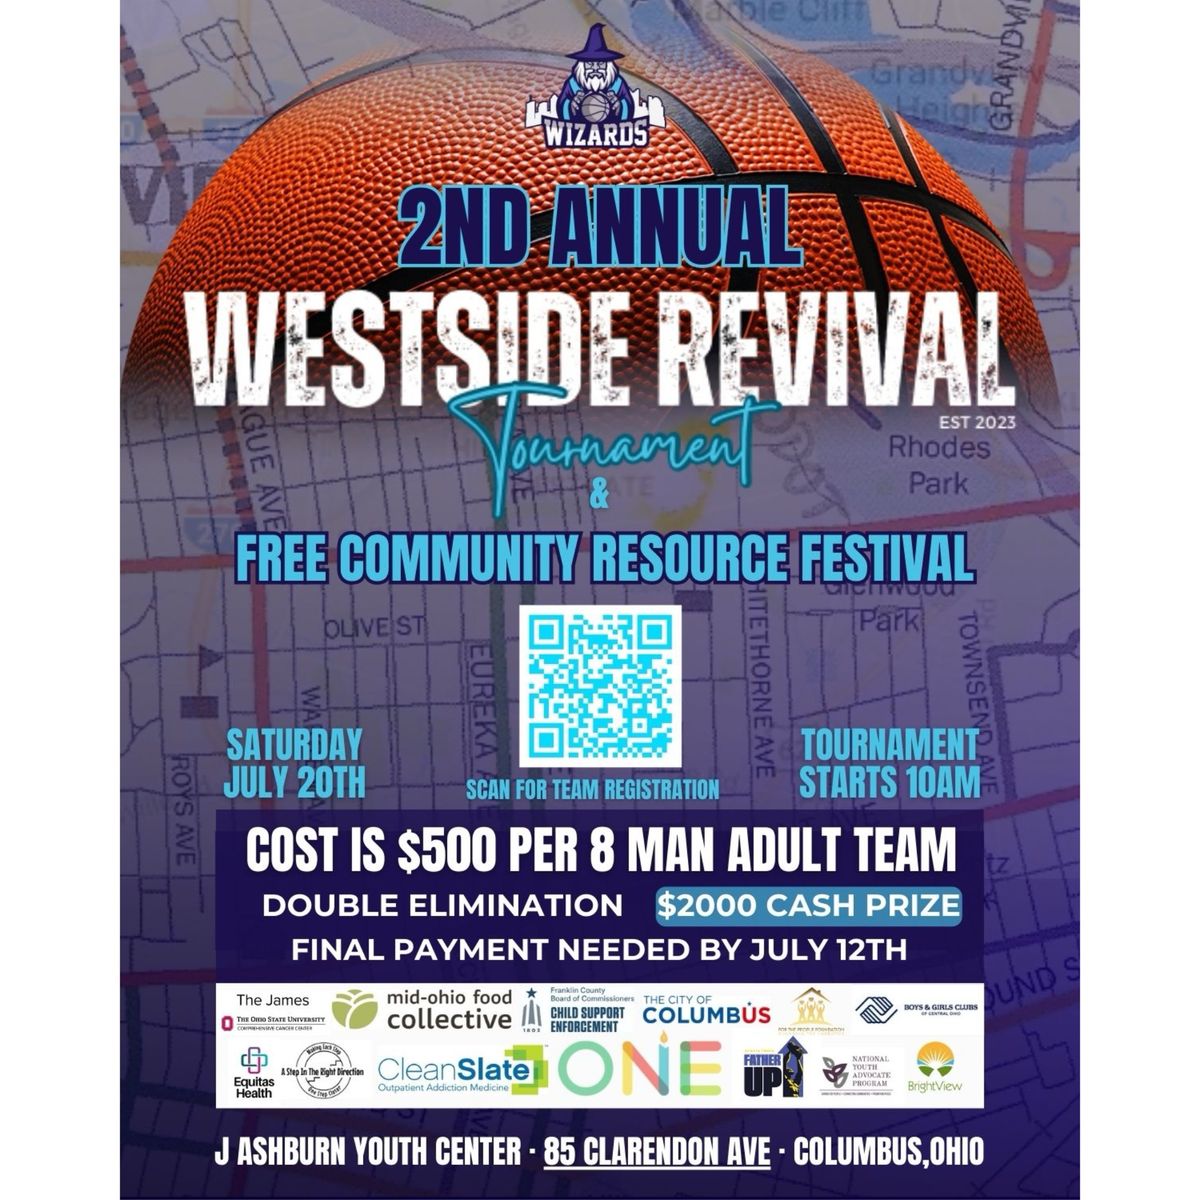 2nd Annual Westside Revival Tournament